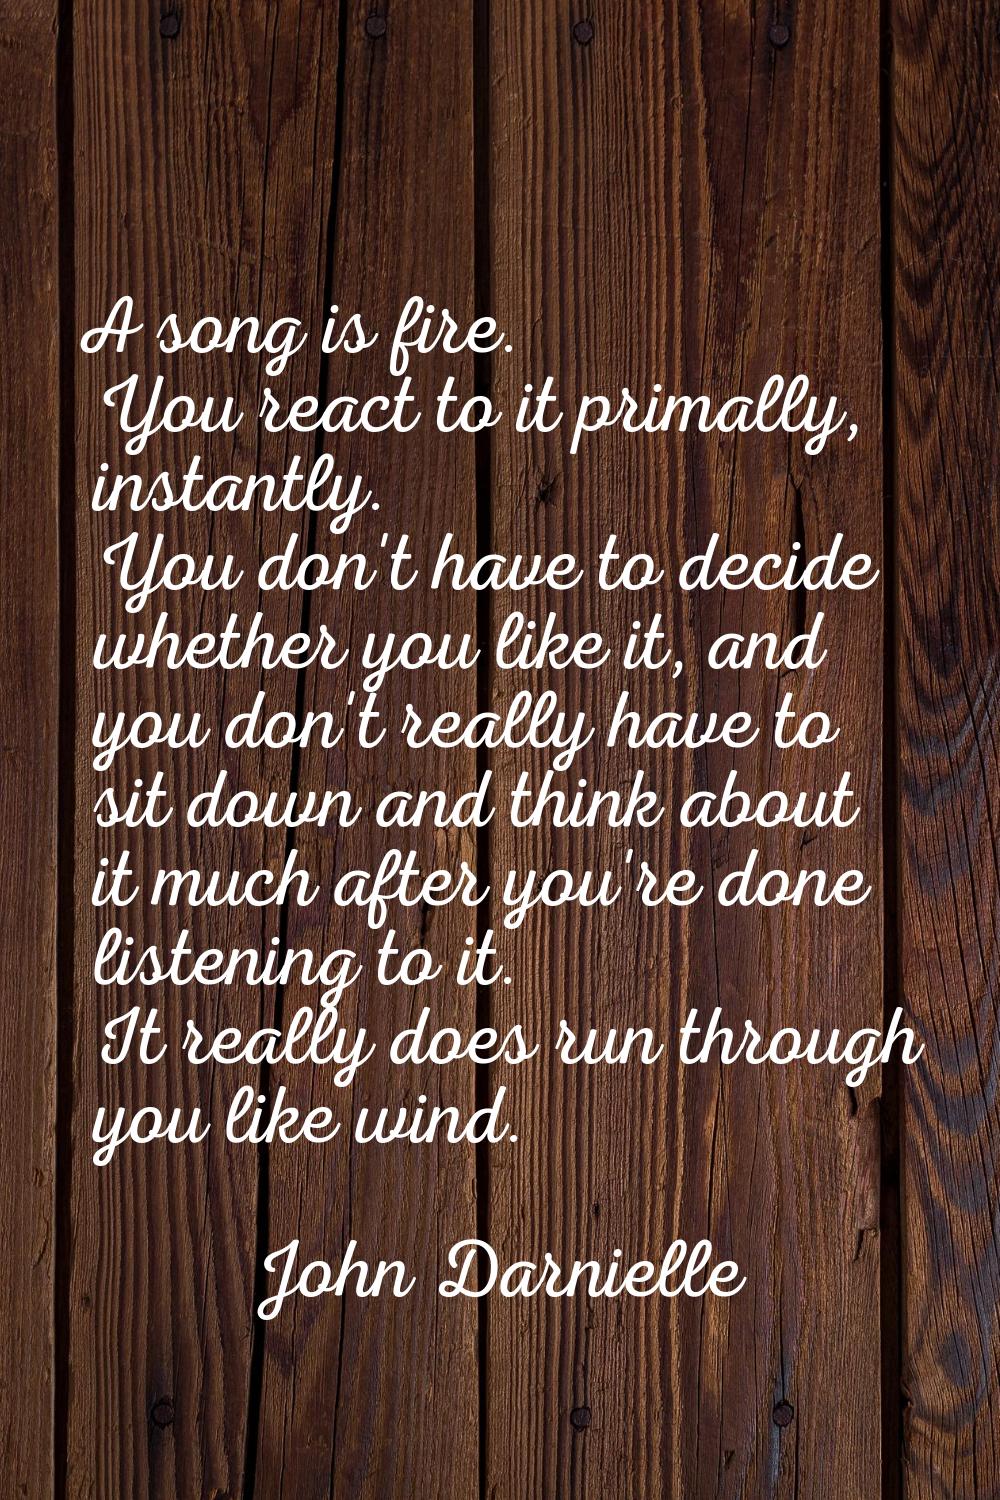 A song is fire. You react to it primally, instantly. You don't have to decide whether you like it, 